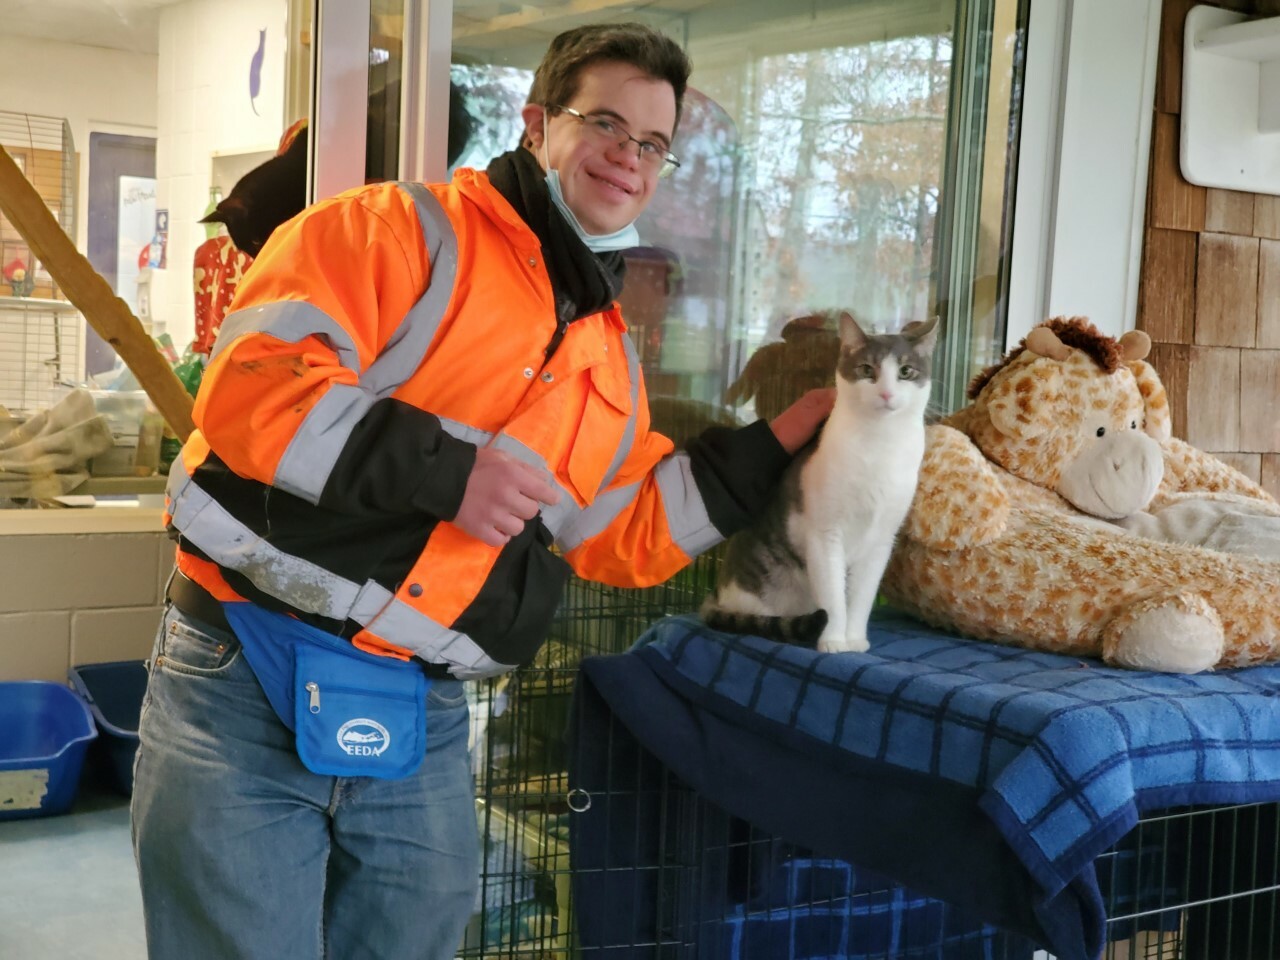 Gregory Ficara is the Southampton Animal Shelter Foundation Volunteer of the Month for December.